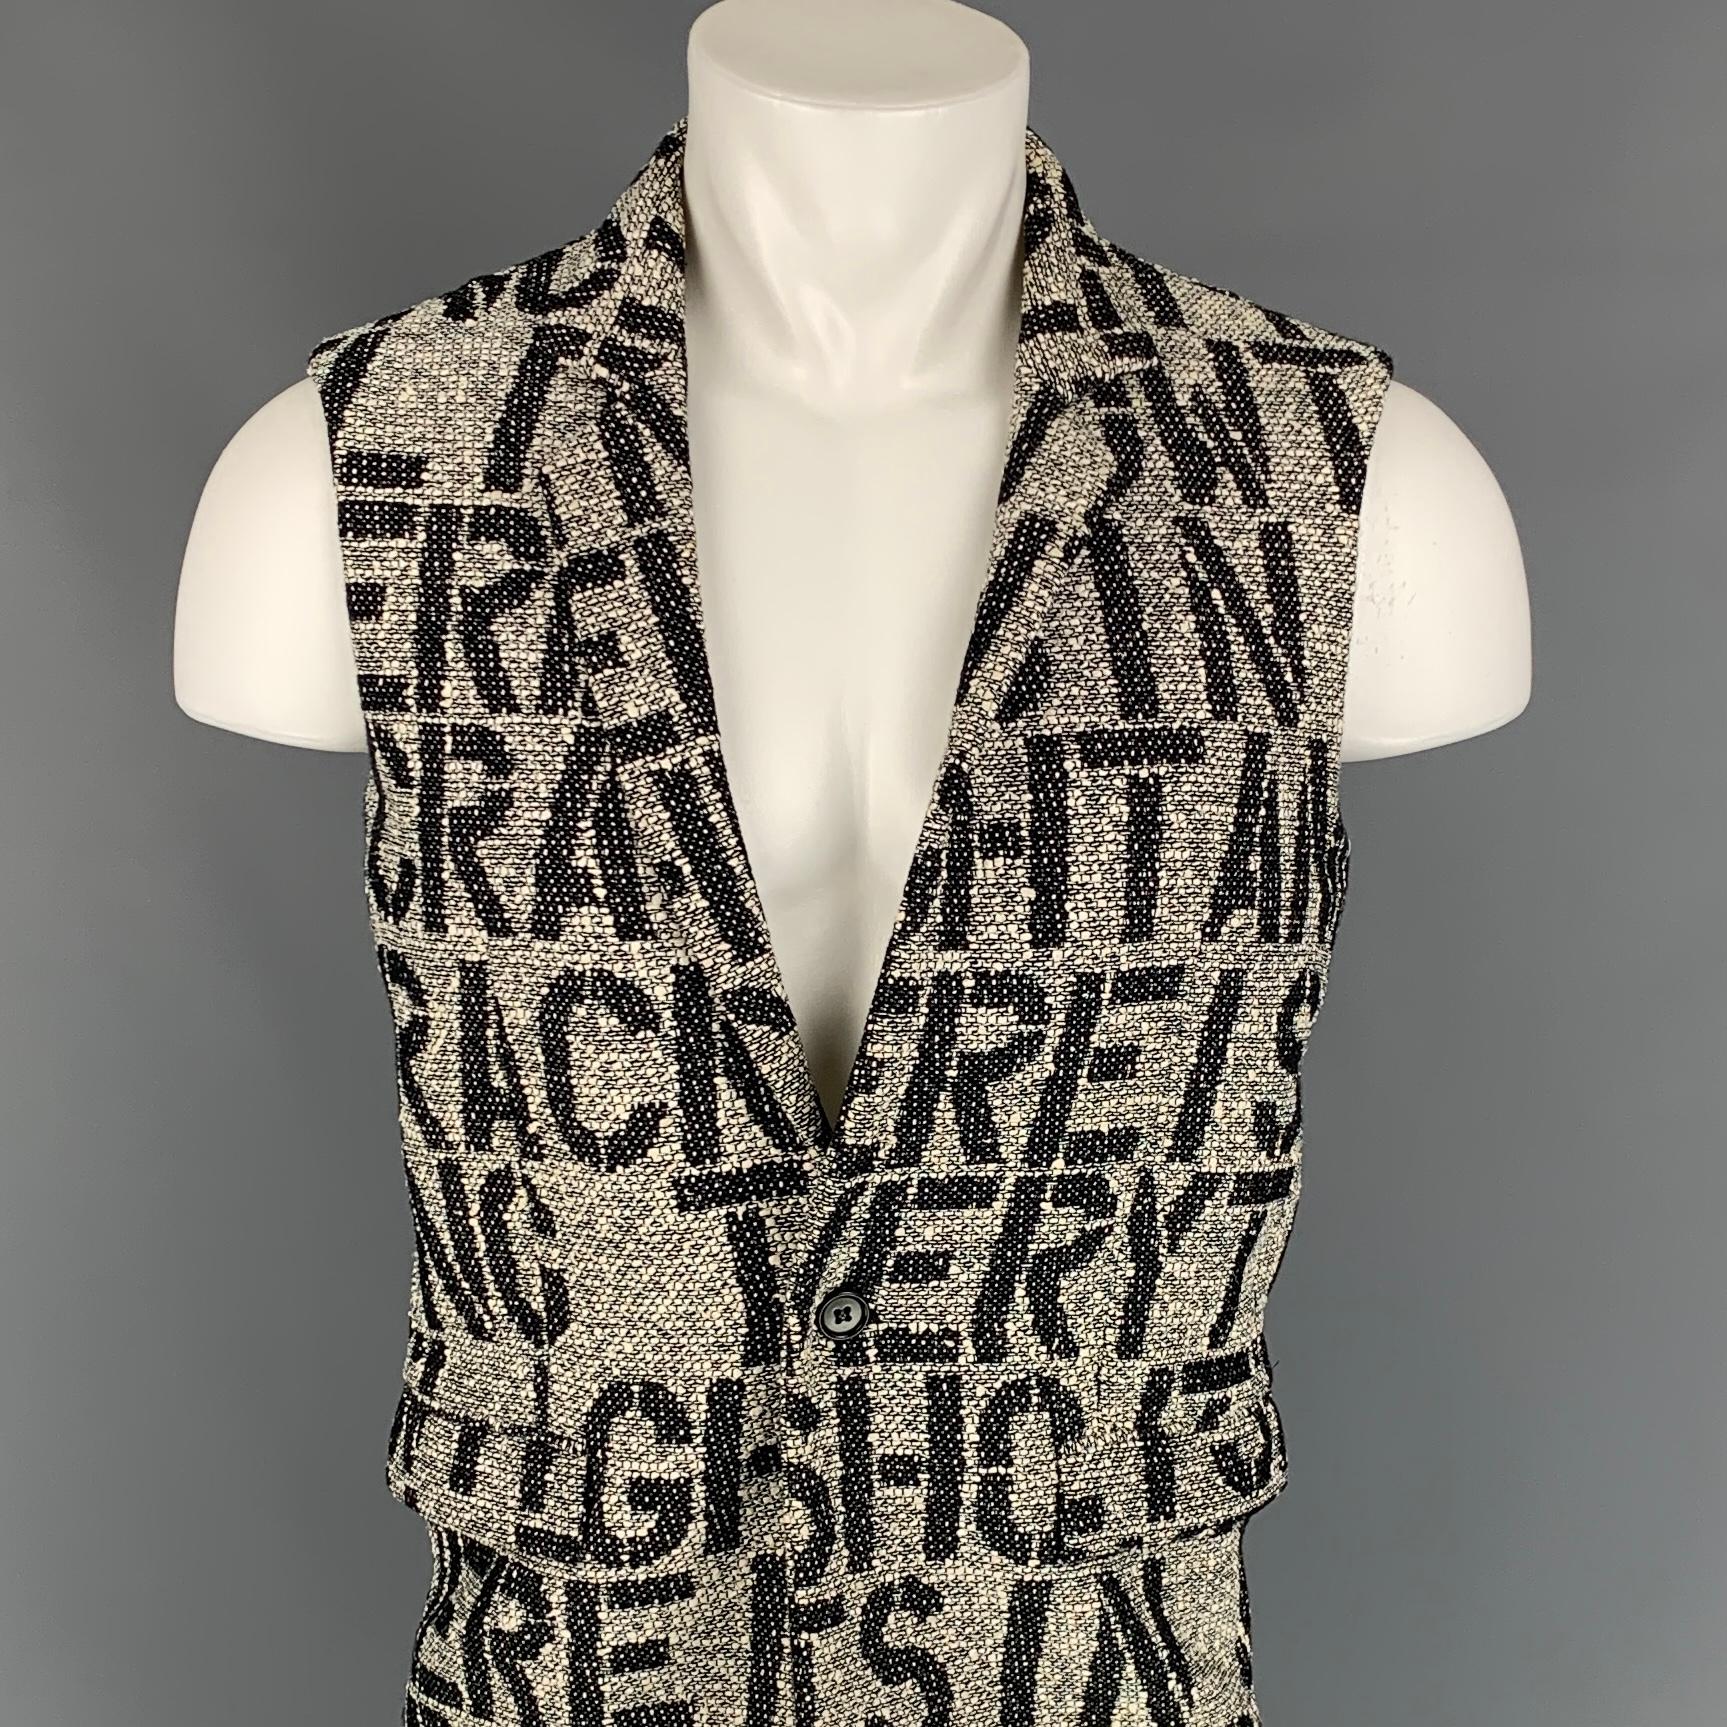 RAF SIMONS Spring-Summer 2009 vest comes in a white & black woven with a Christopher Wool inspired print the reads 